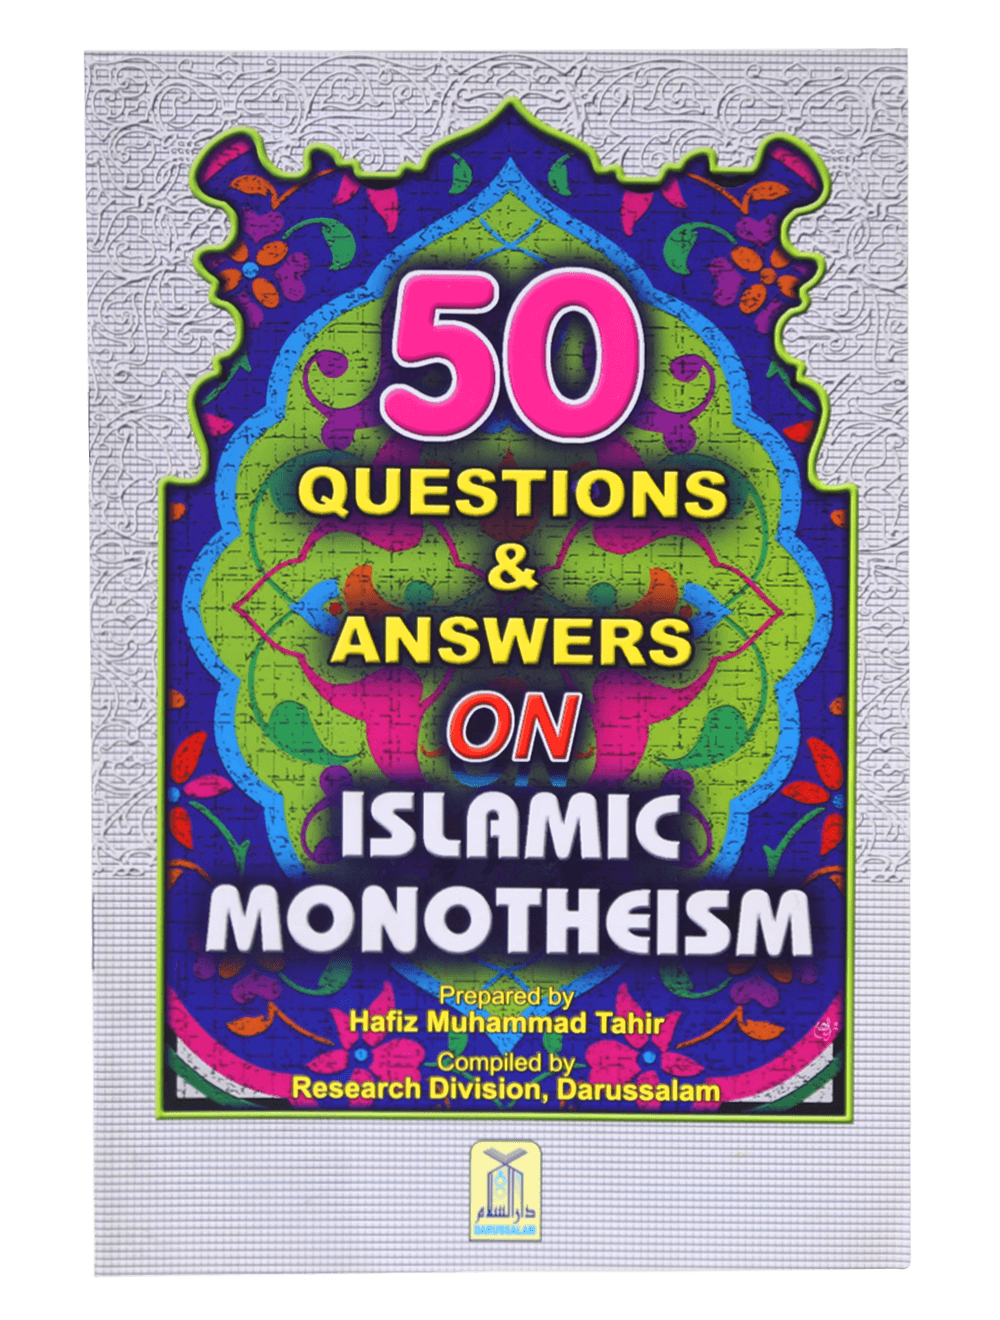 50 Questions & Answers on Islamic Monotheism